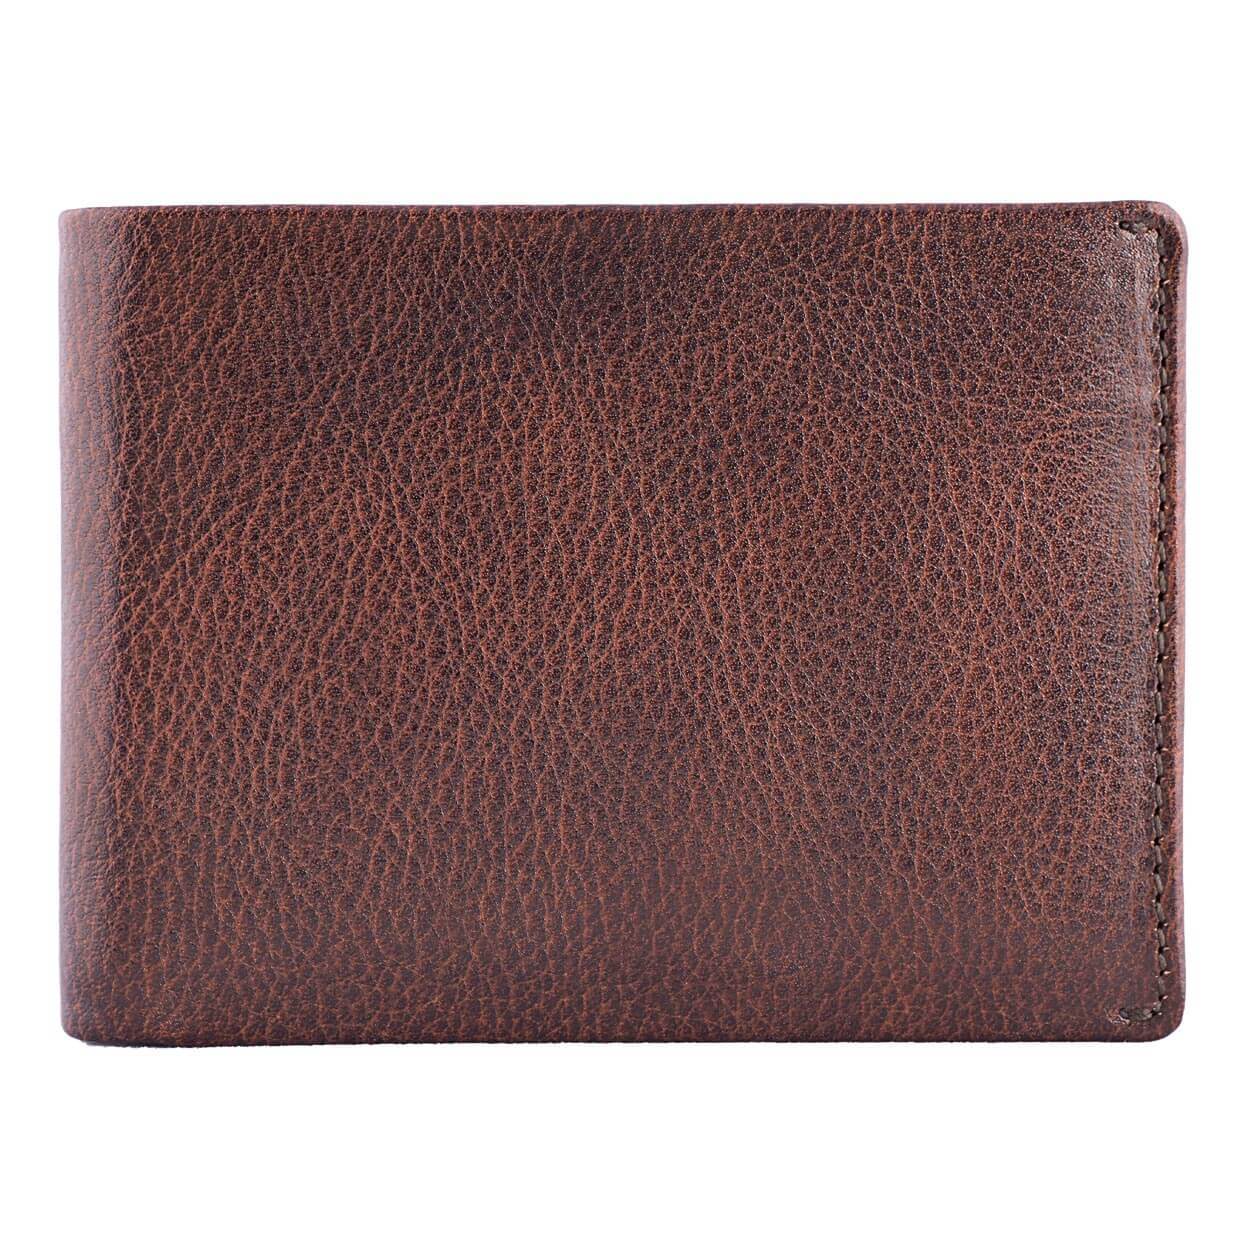 Access Denied Slim Leather Bifold Wallets For Men - India